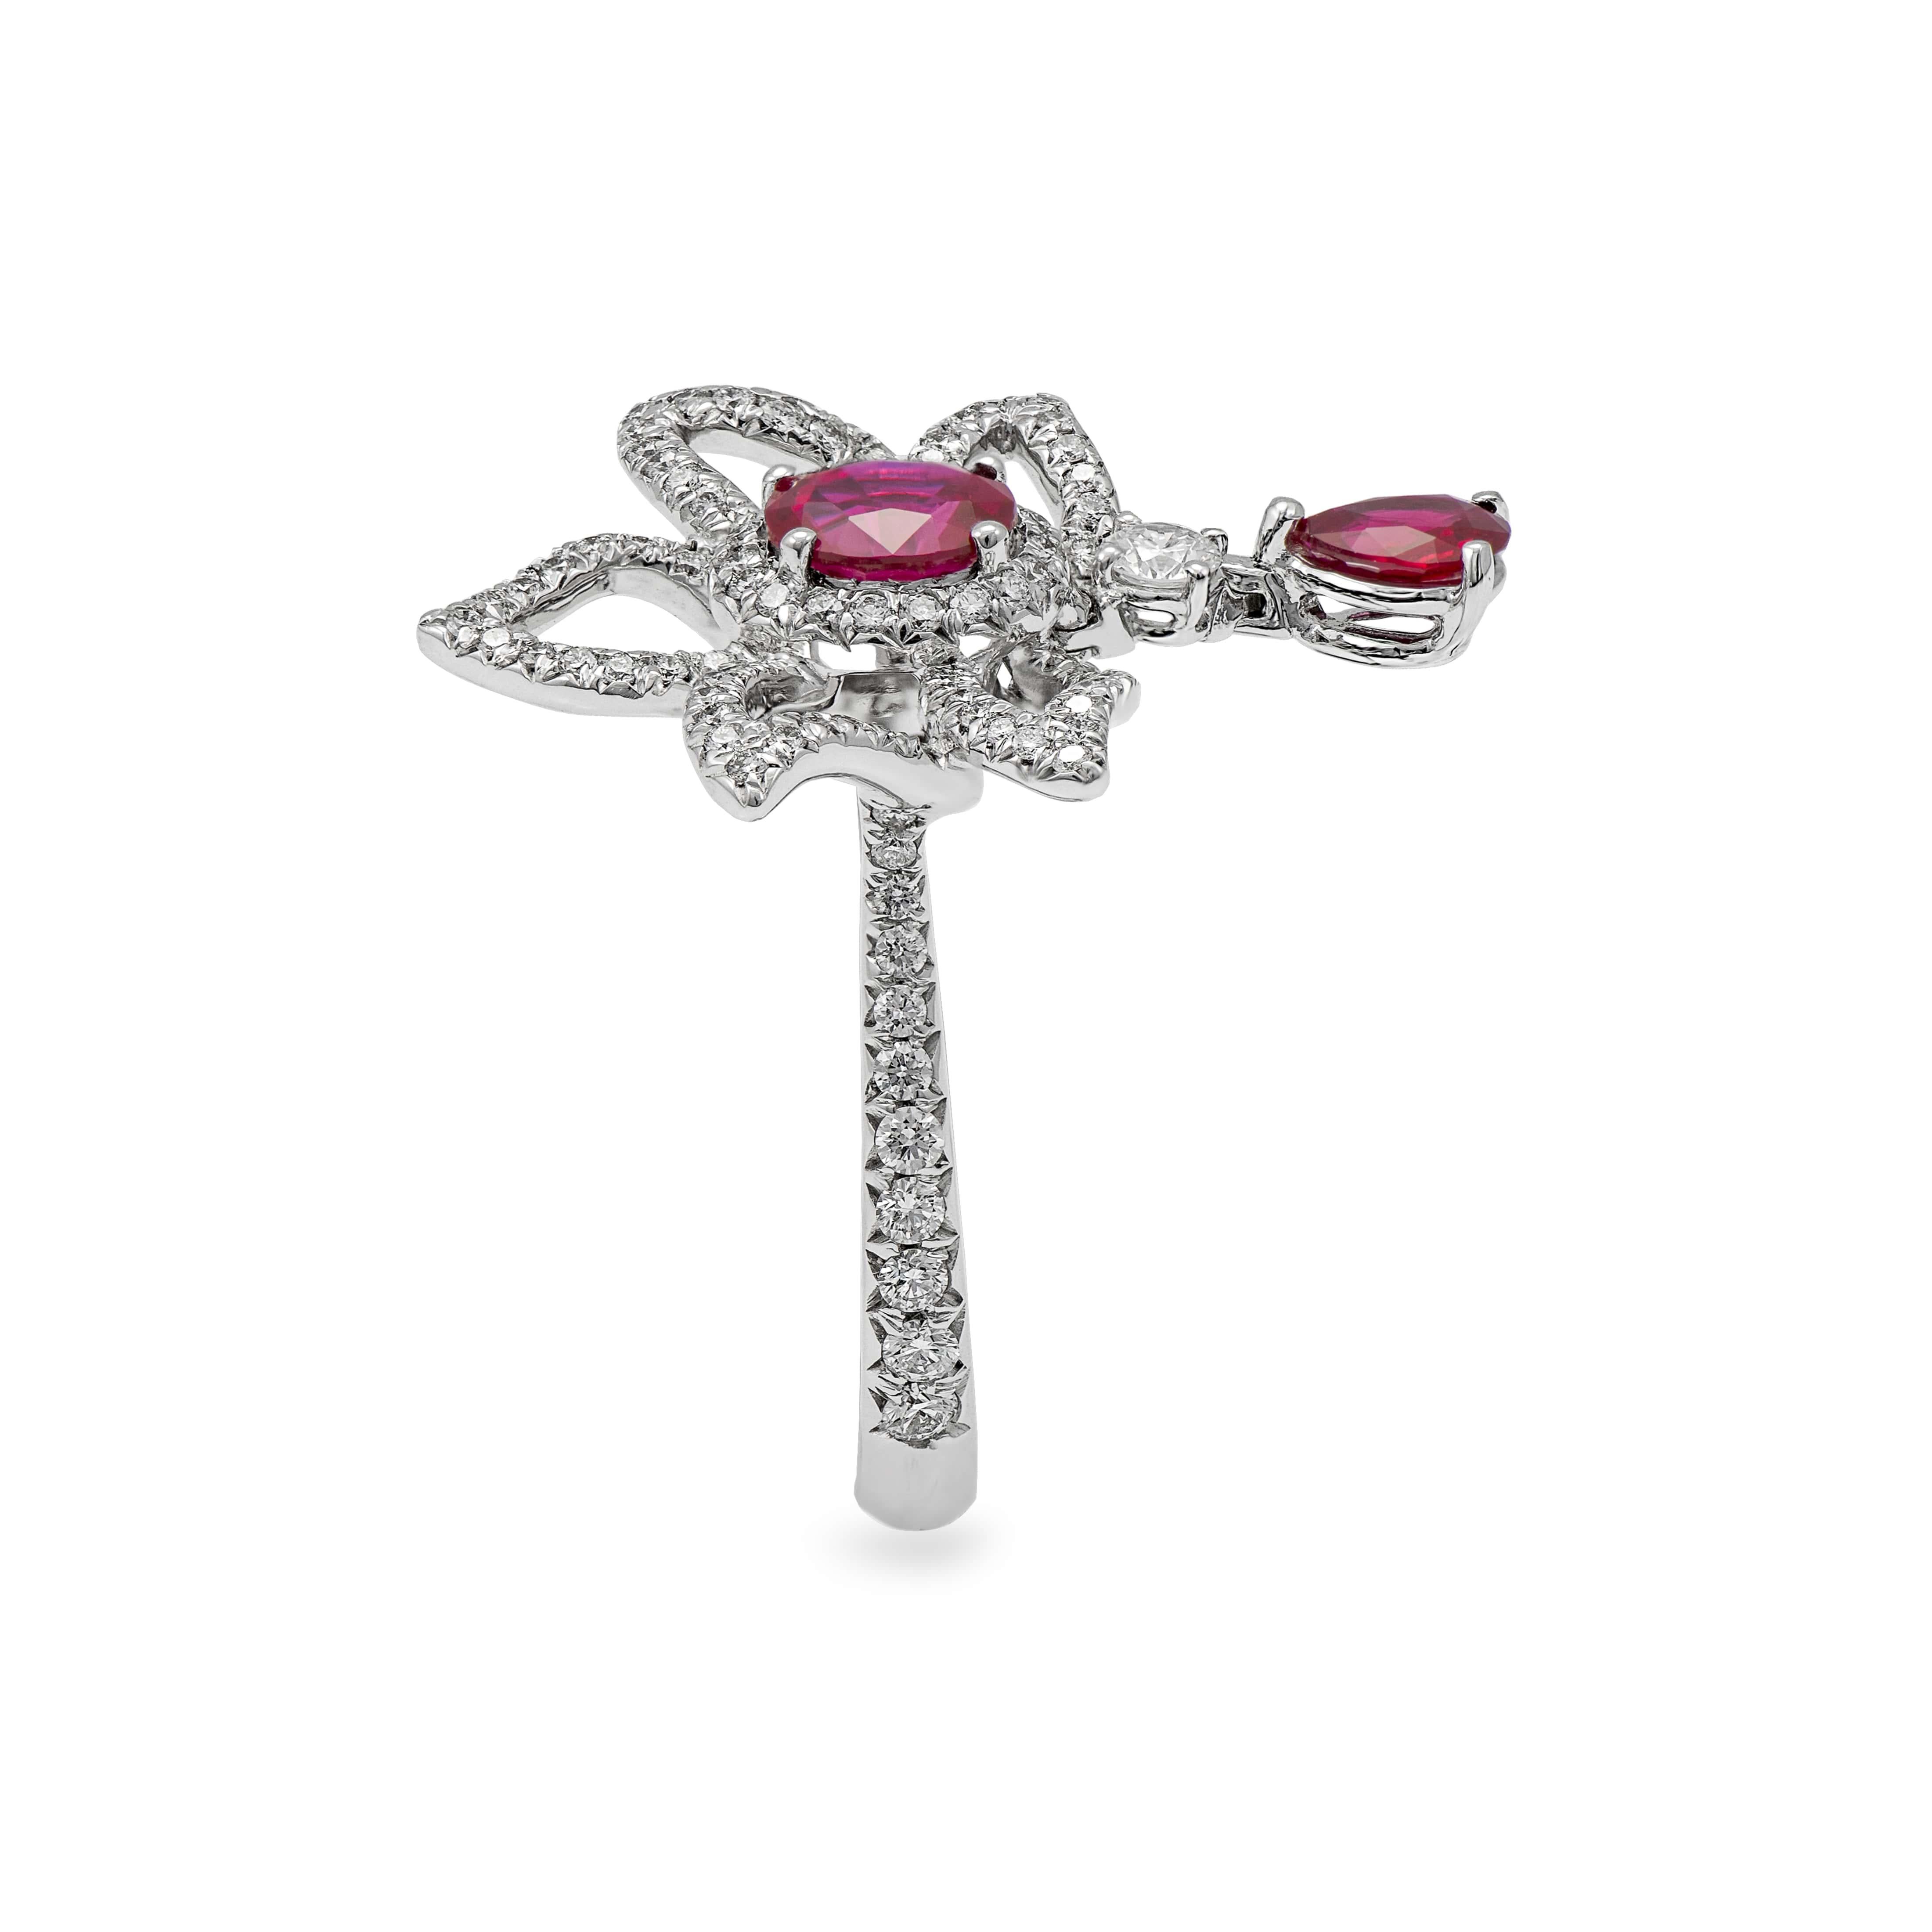 Contemporary 18 Karat White Gold 1.03 Ruby and 0.6 Carat Diamond Cocktail Ring For Sale